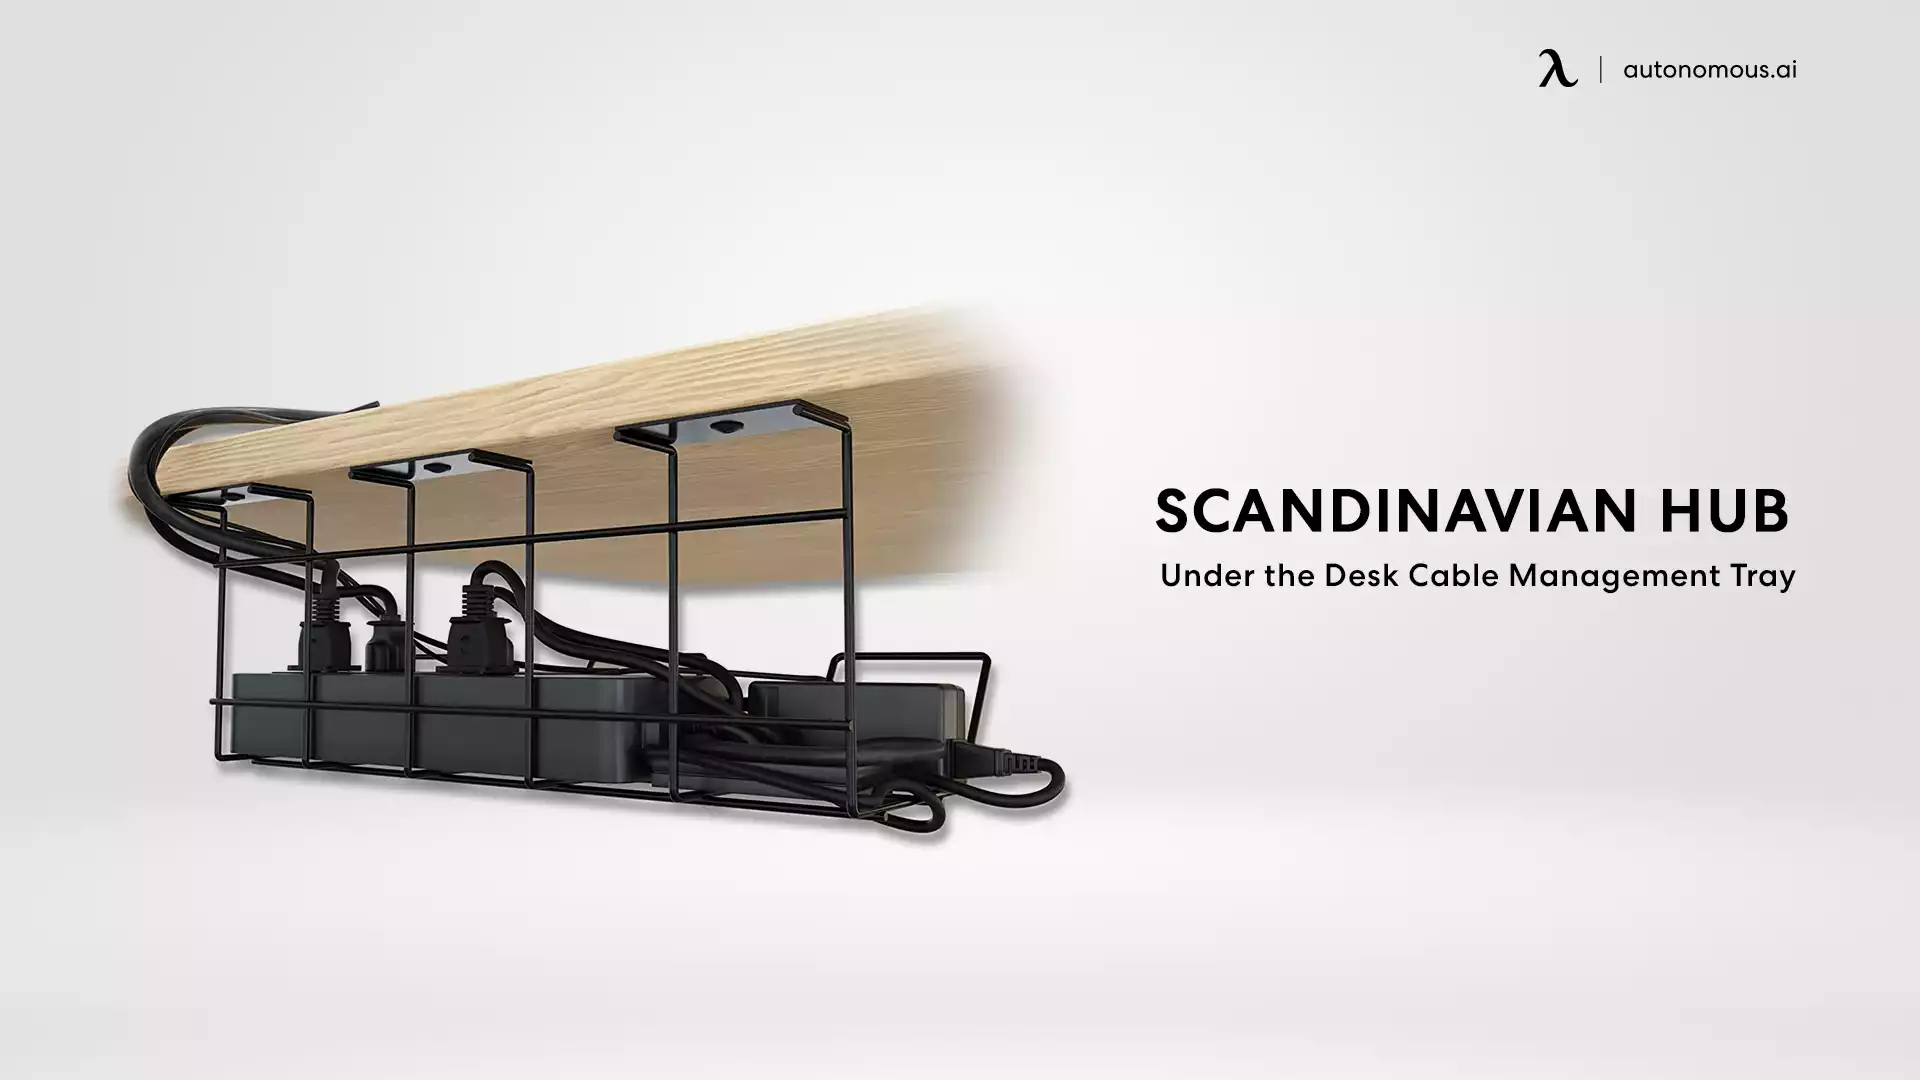 Under the Desk Cable Management Tray by Scandinavian Hub